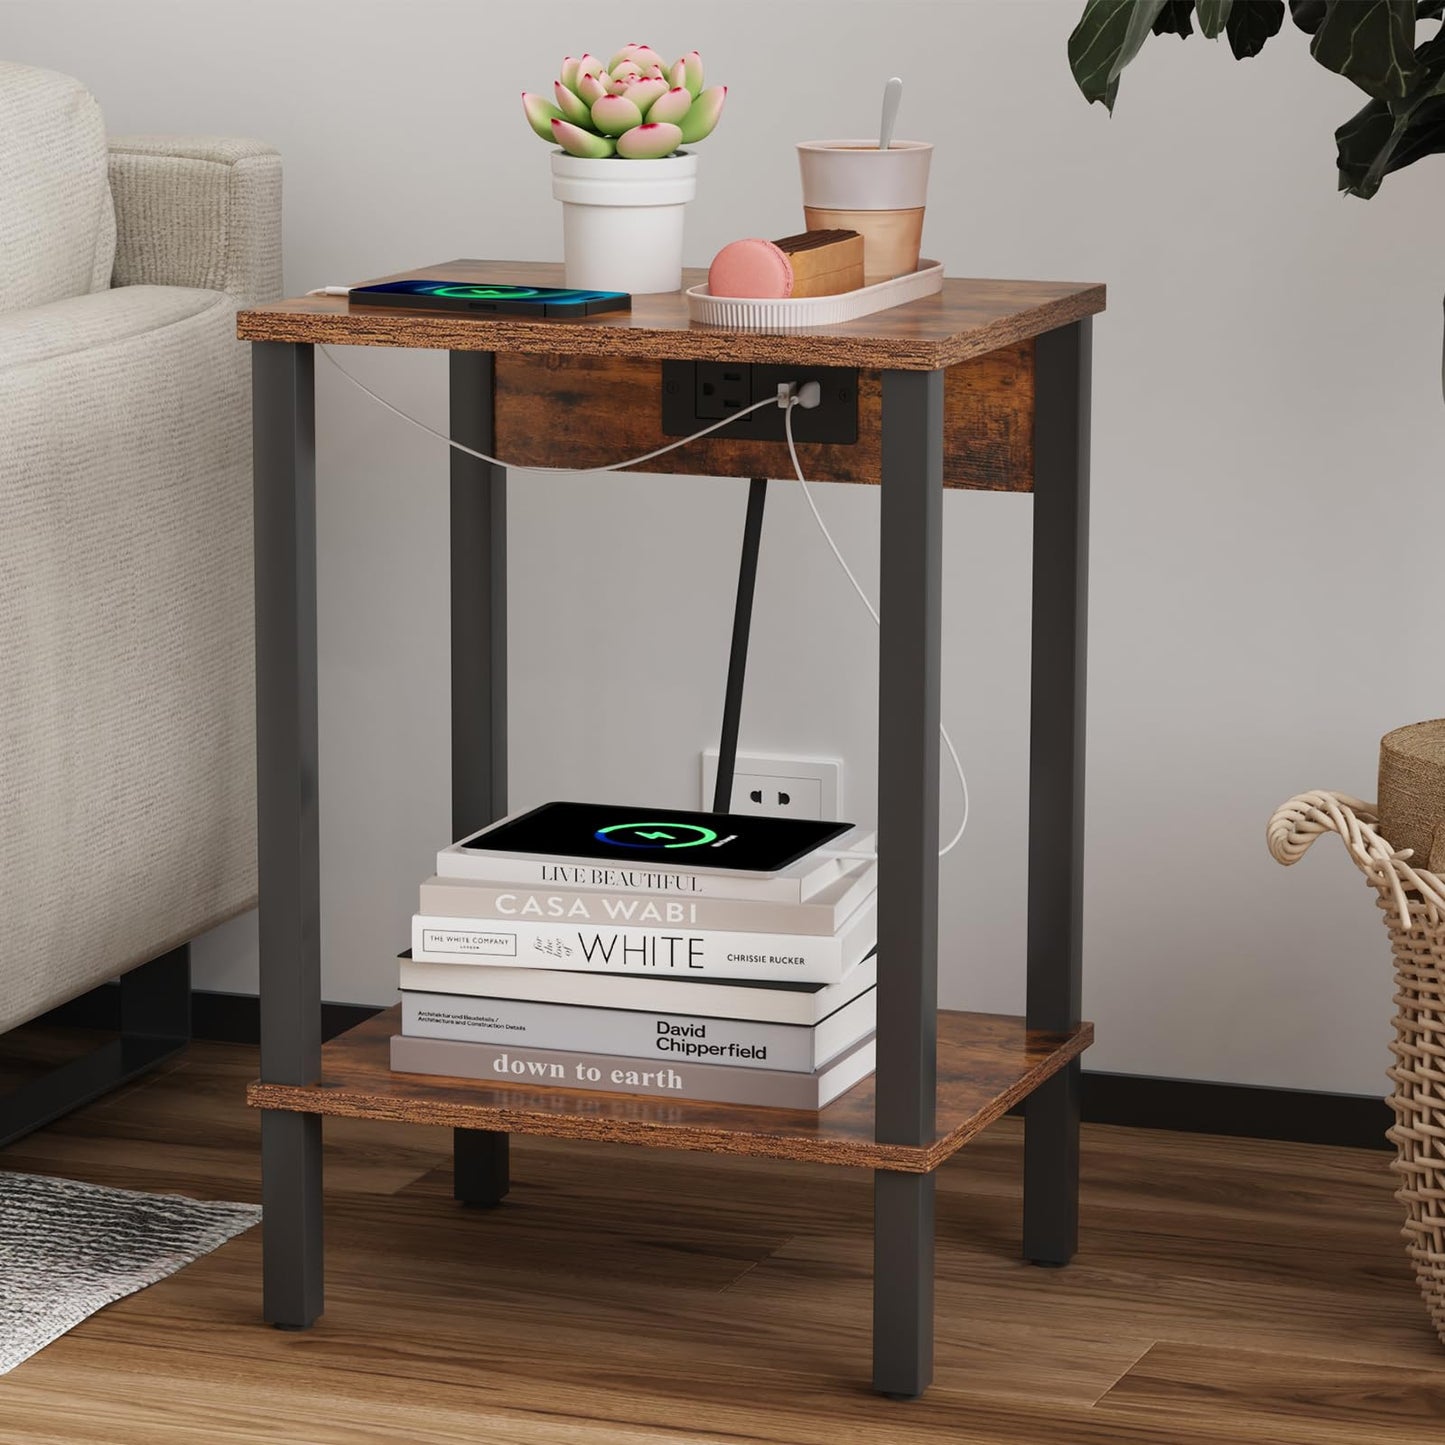 VIMBER Set of 2 End Table with Charging Station, Narrow Side Table with USB Ports and Outlets, Nightstands with 2-Tier Storage Shelves, Sofa Table for Small Space Living Room Bedroom